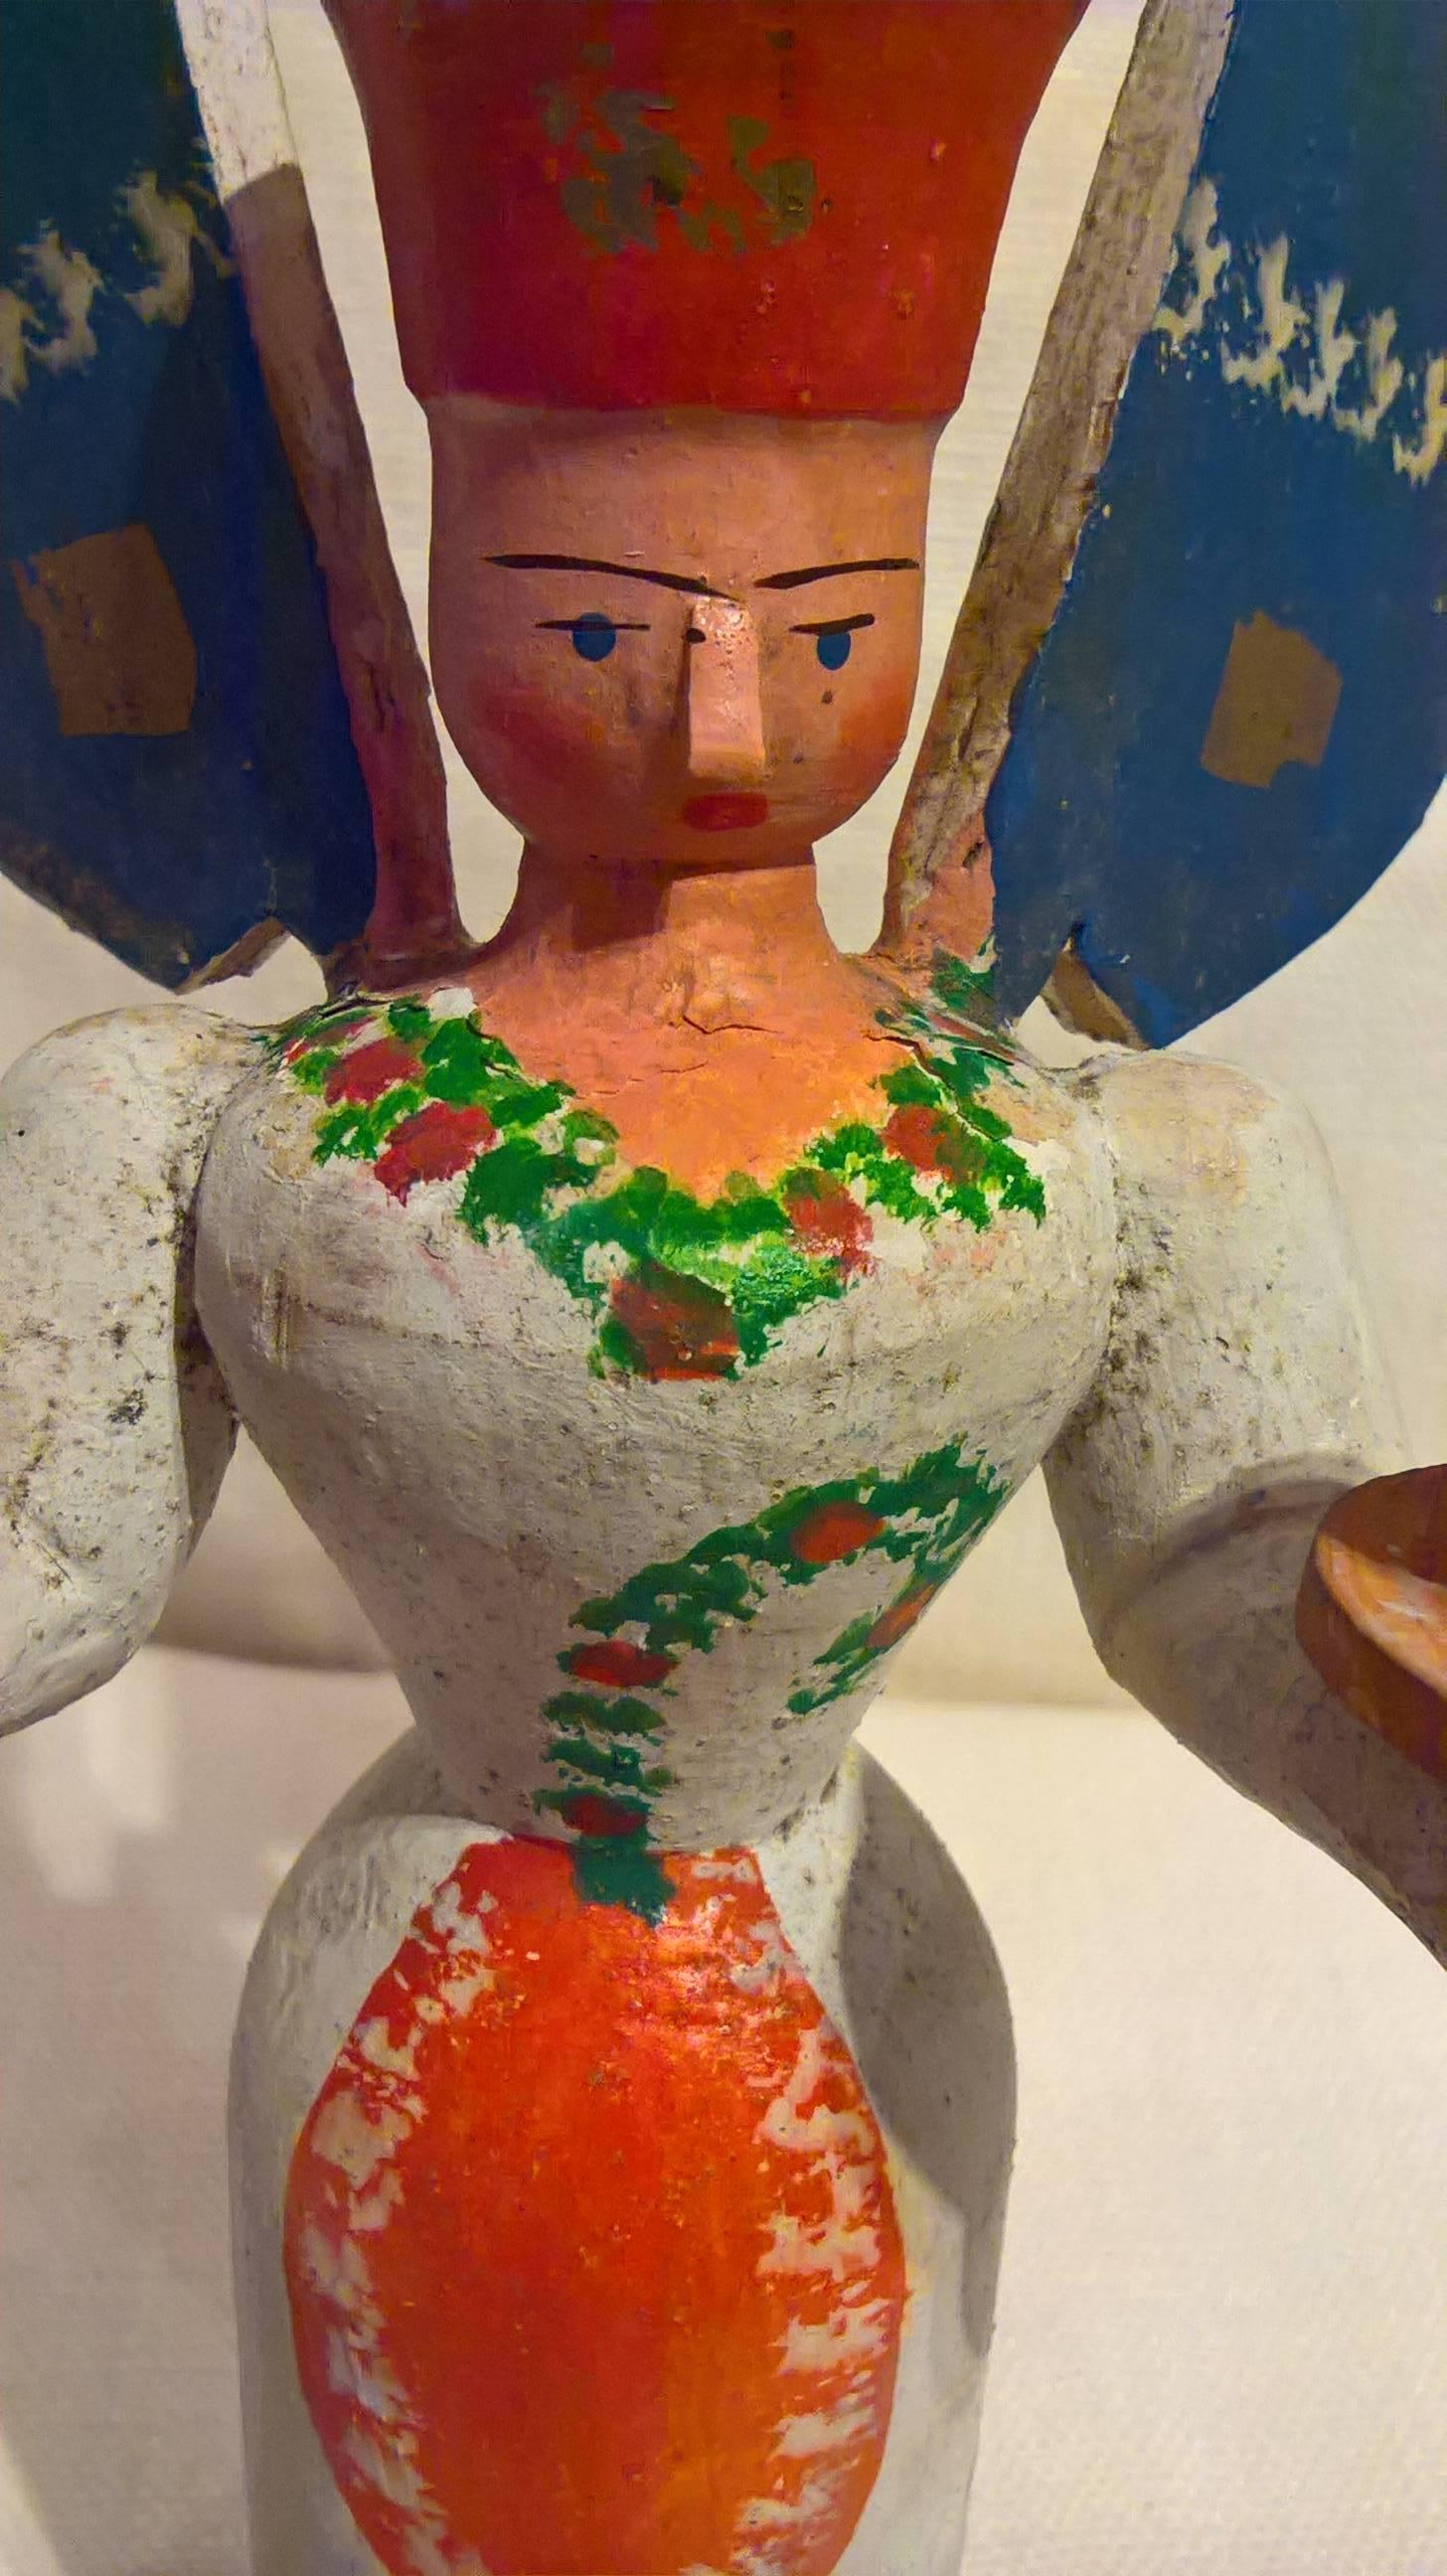 Beautiful colored wooden angel figure from the Erzgebirge. The region Erzgebirge formerly Eastern Germany is famous for this special kind of Christmas figures, where intricate carving has been their home. Completely hand painted and decorated.